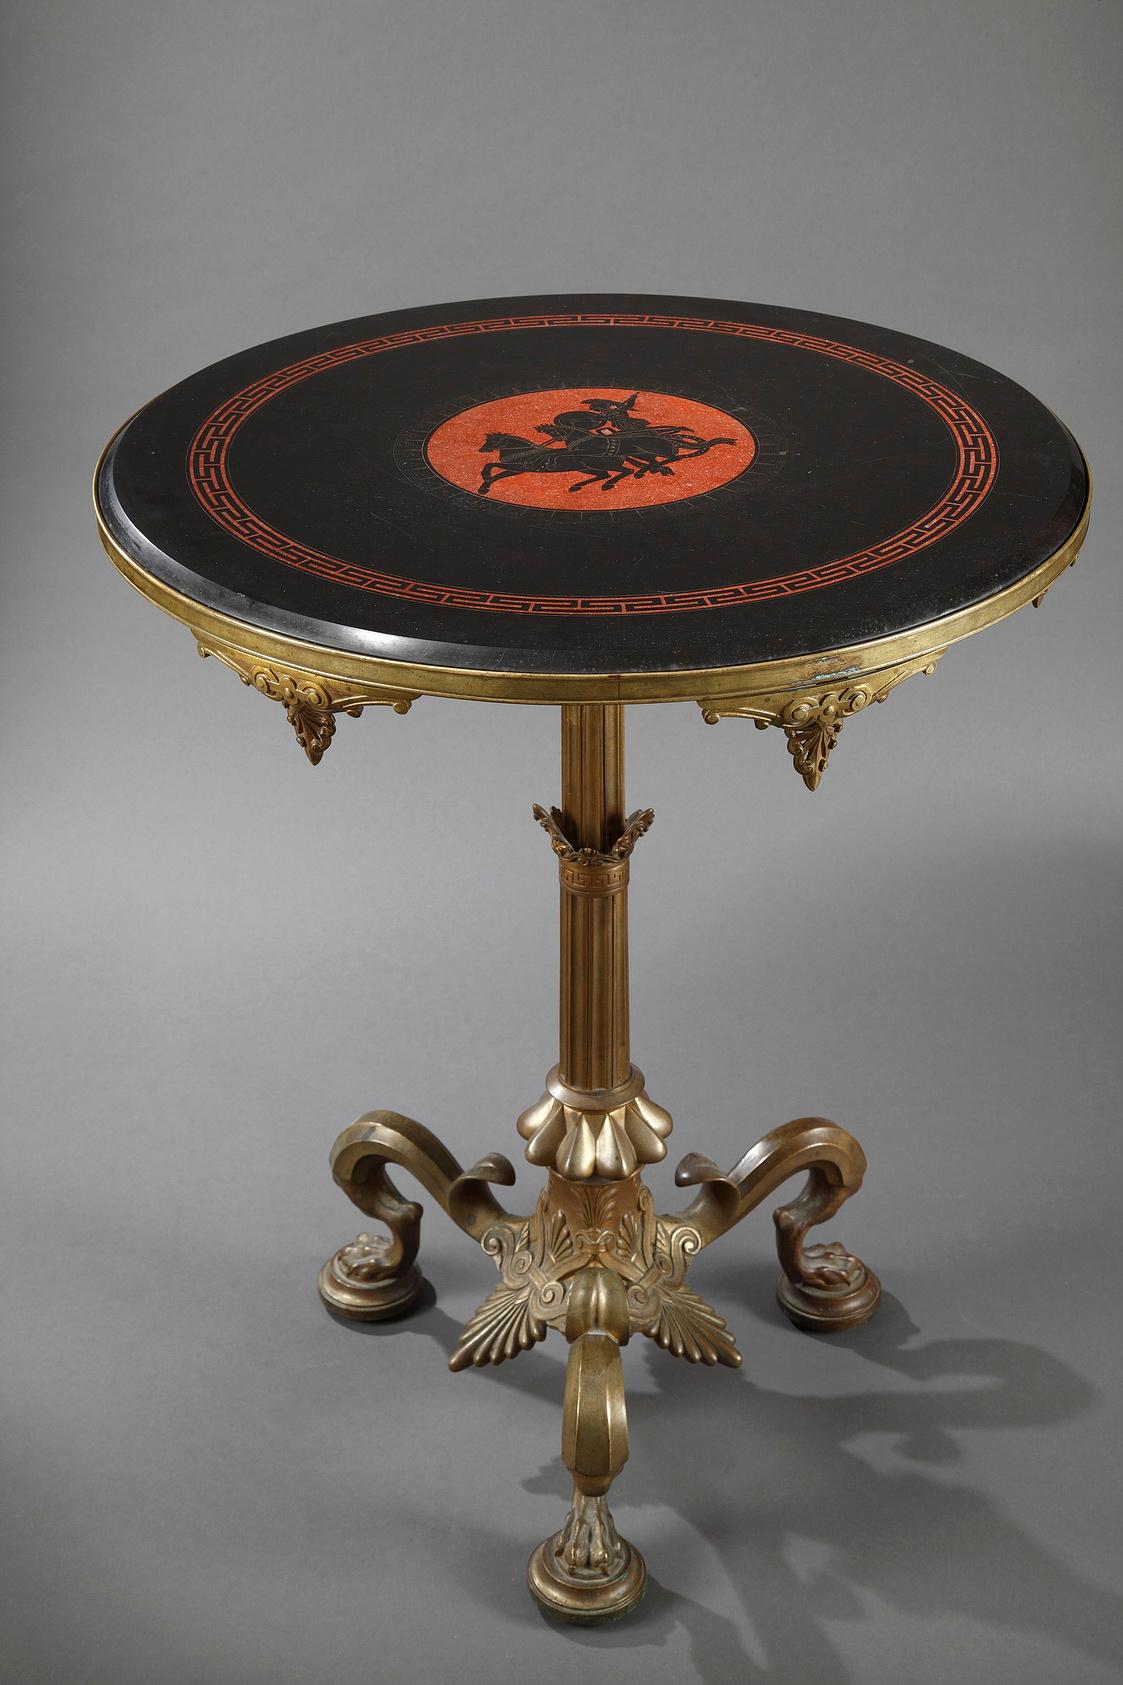 A tripod gueridon in gilded bronze attributed to F. Barbedienne, decorated with palm-leaves and standing on lion’s feet. The black marble top is decorated with an antique chariot scene and a Greek frieze picked out in red « Pompeian »